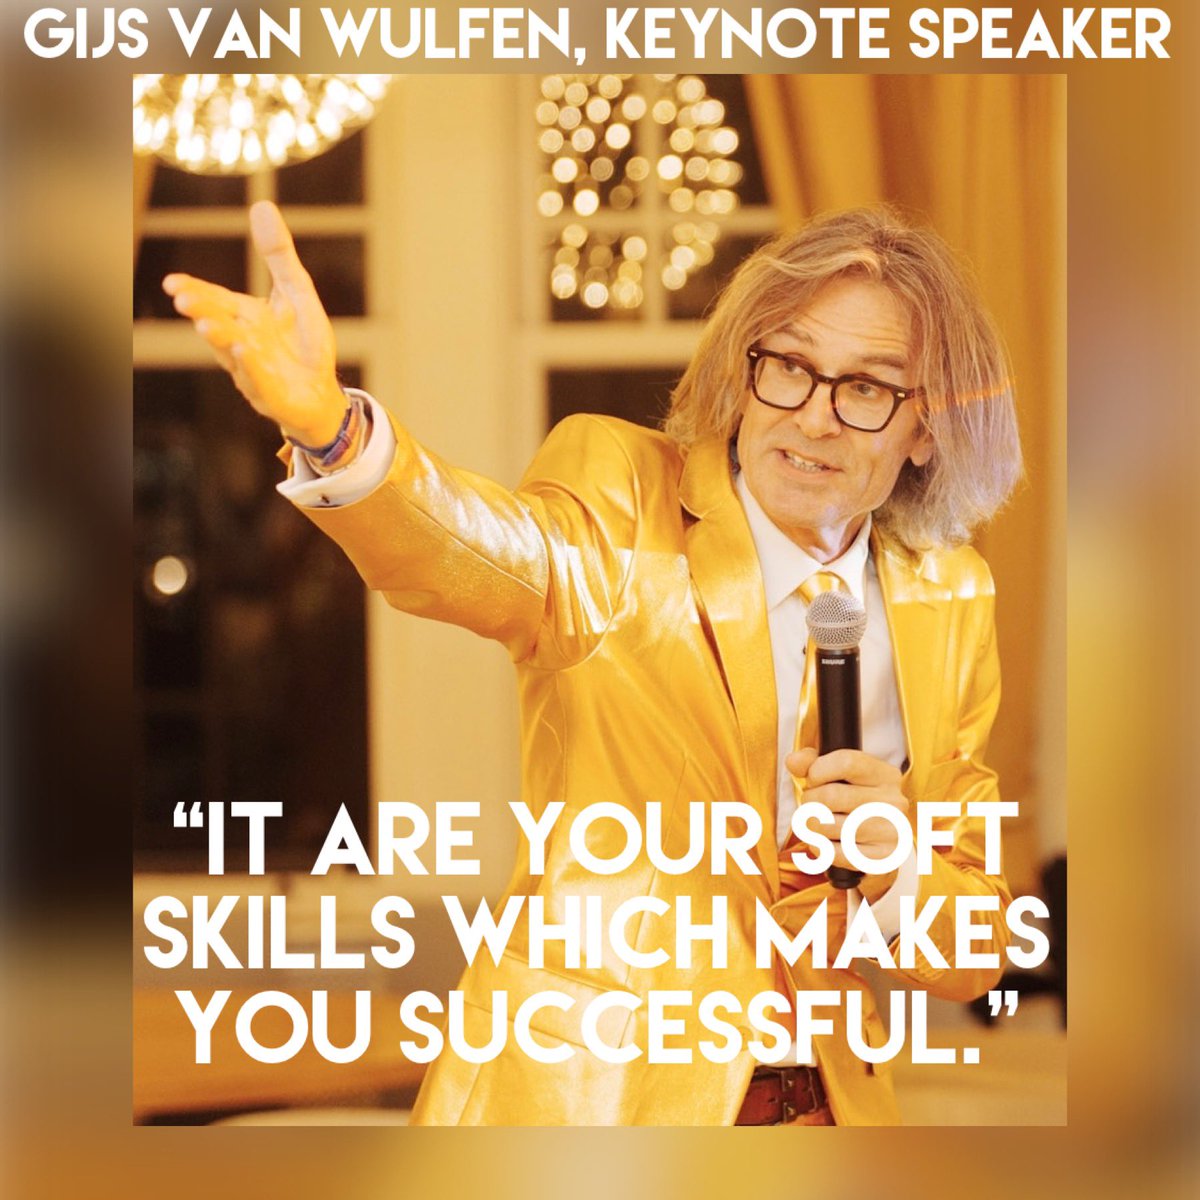 “It are your soft skills which make you successful.” Wishing you an insightful weekend! Gijs #quote #skills #innovation Ps. When you want to boost your skills as innovation leader or consultant and double your innovation effectiveness, then check out: bit.ly/forth-training